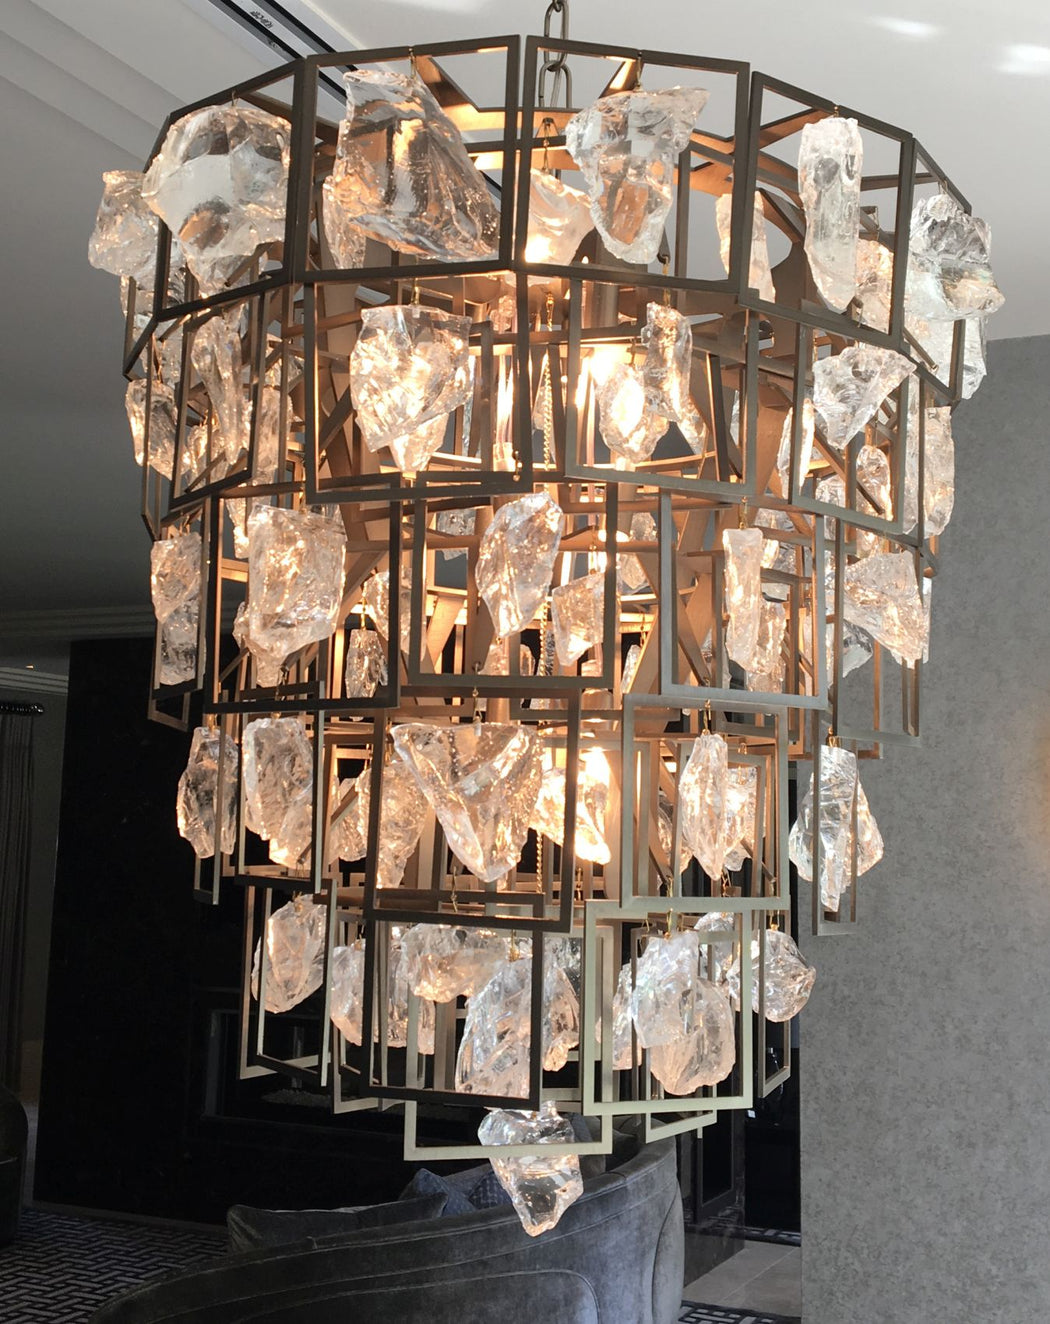 Large modern bespoke chandelier with Murano glass or rock crystal